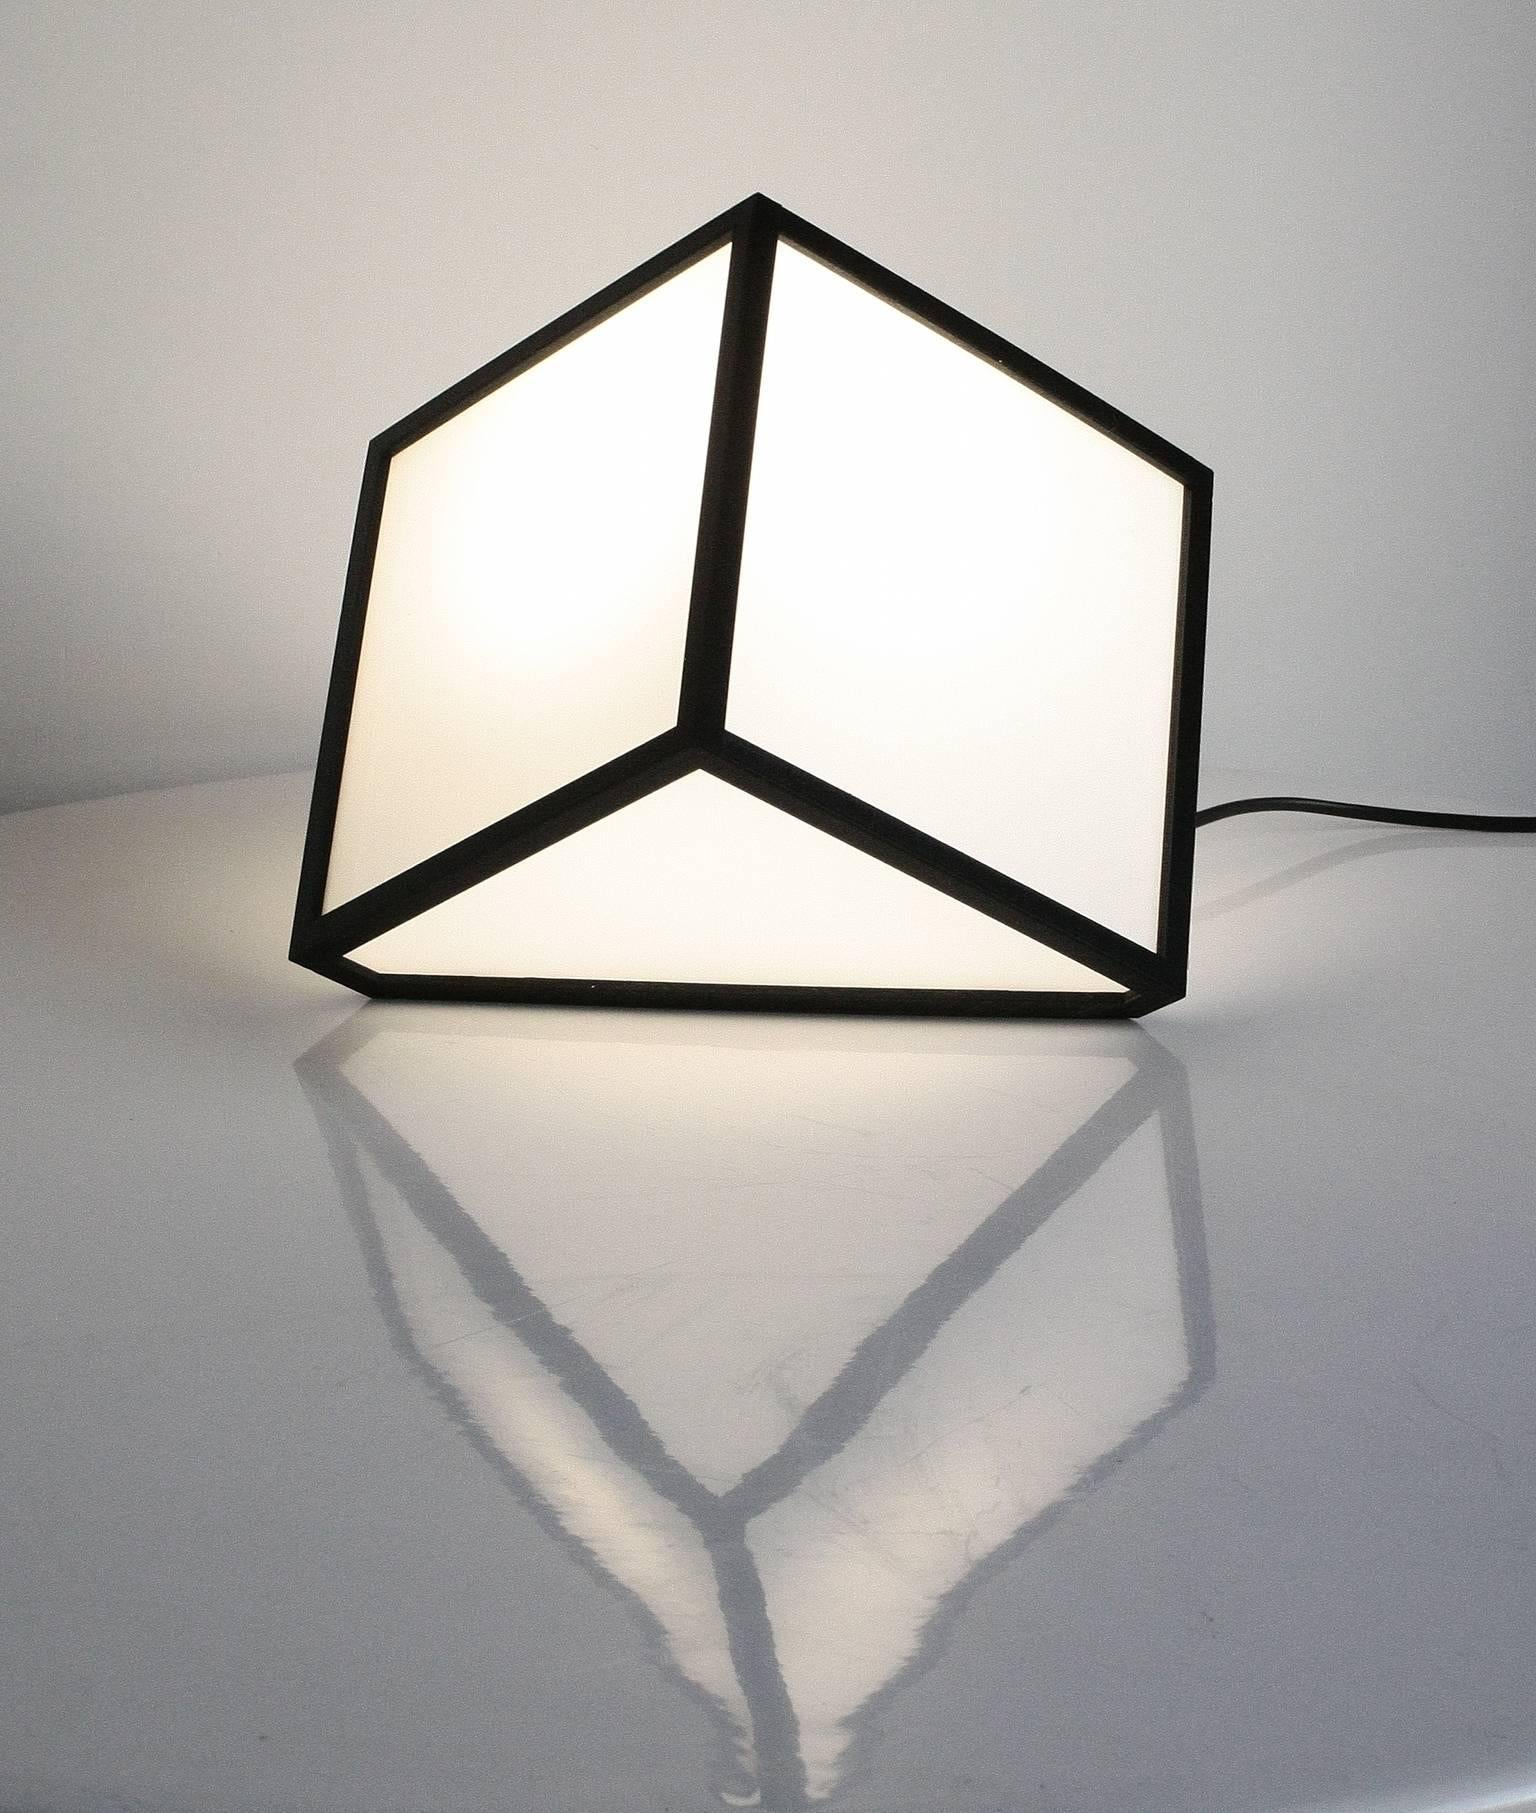 7face cube sculpture lamps are made using 3D printing and opaline plexiglass. Their main characteristic resides in the seventh face, that support, which has a different inclination depending on the model.
The black frame, made of PLA (polylactic